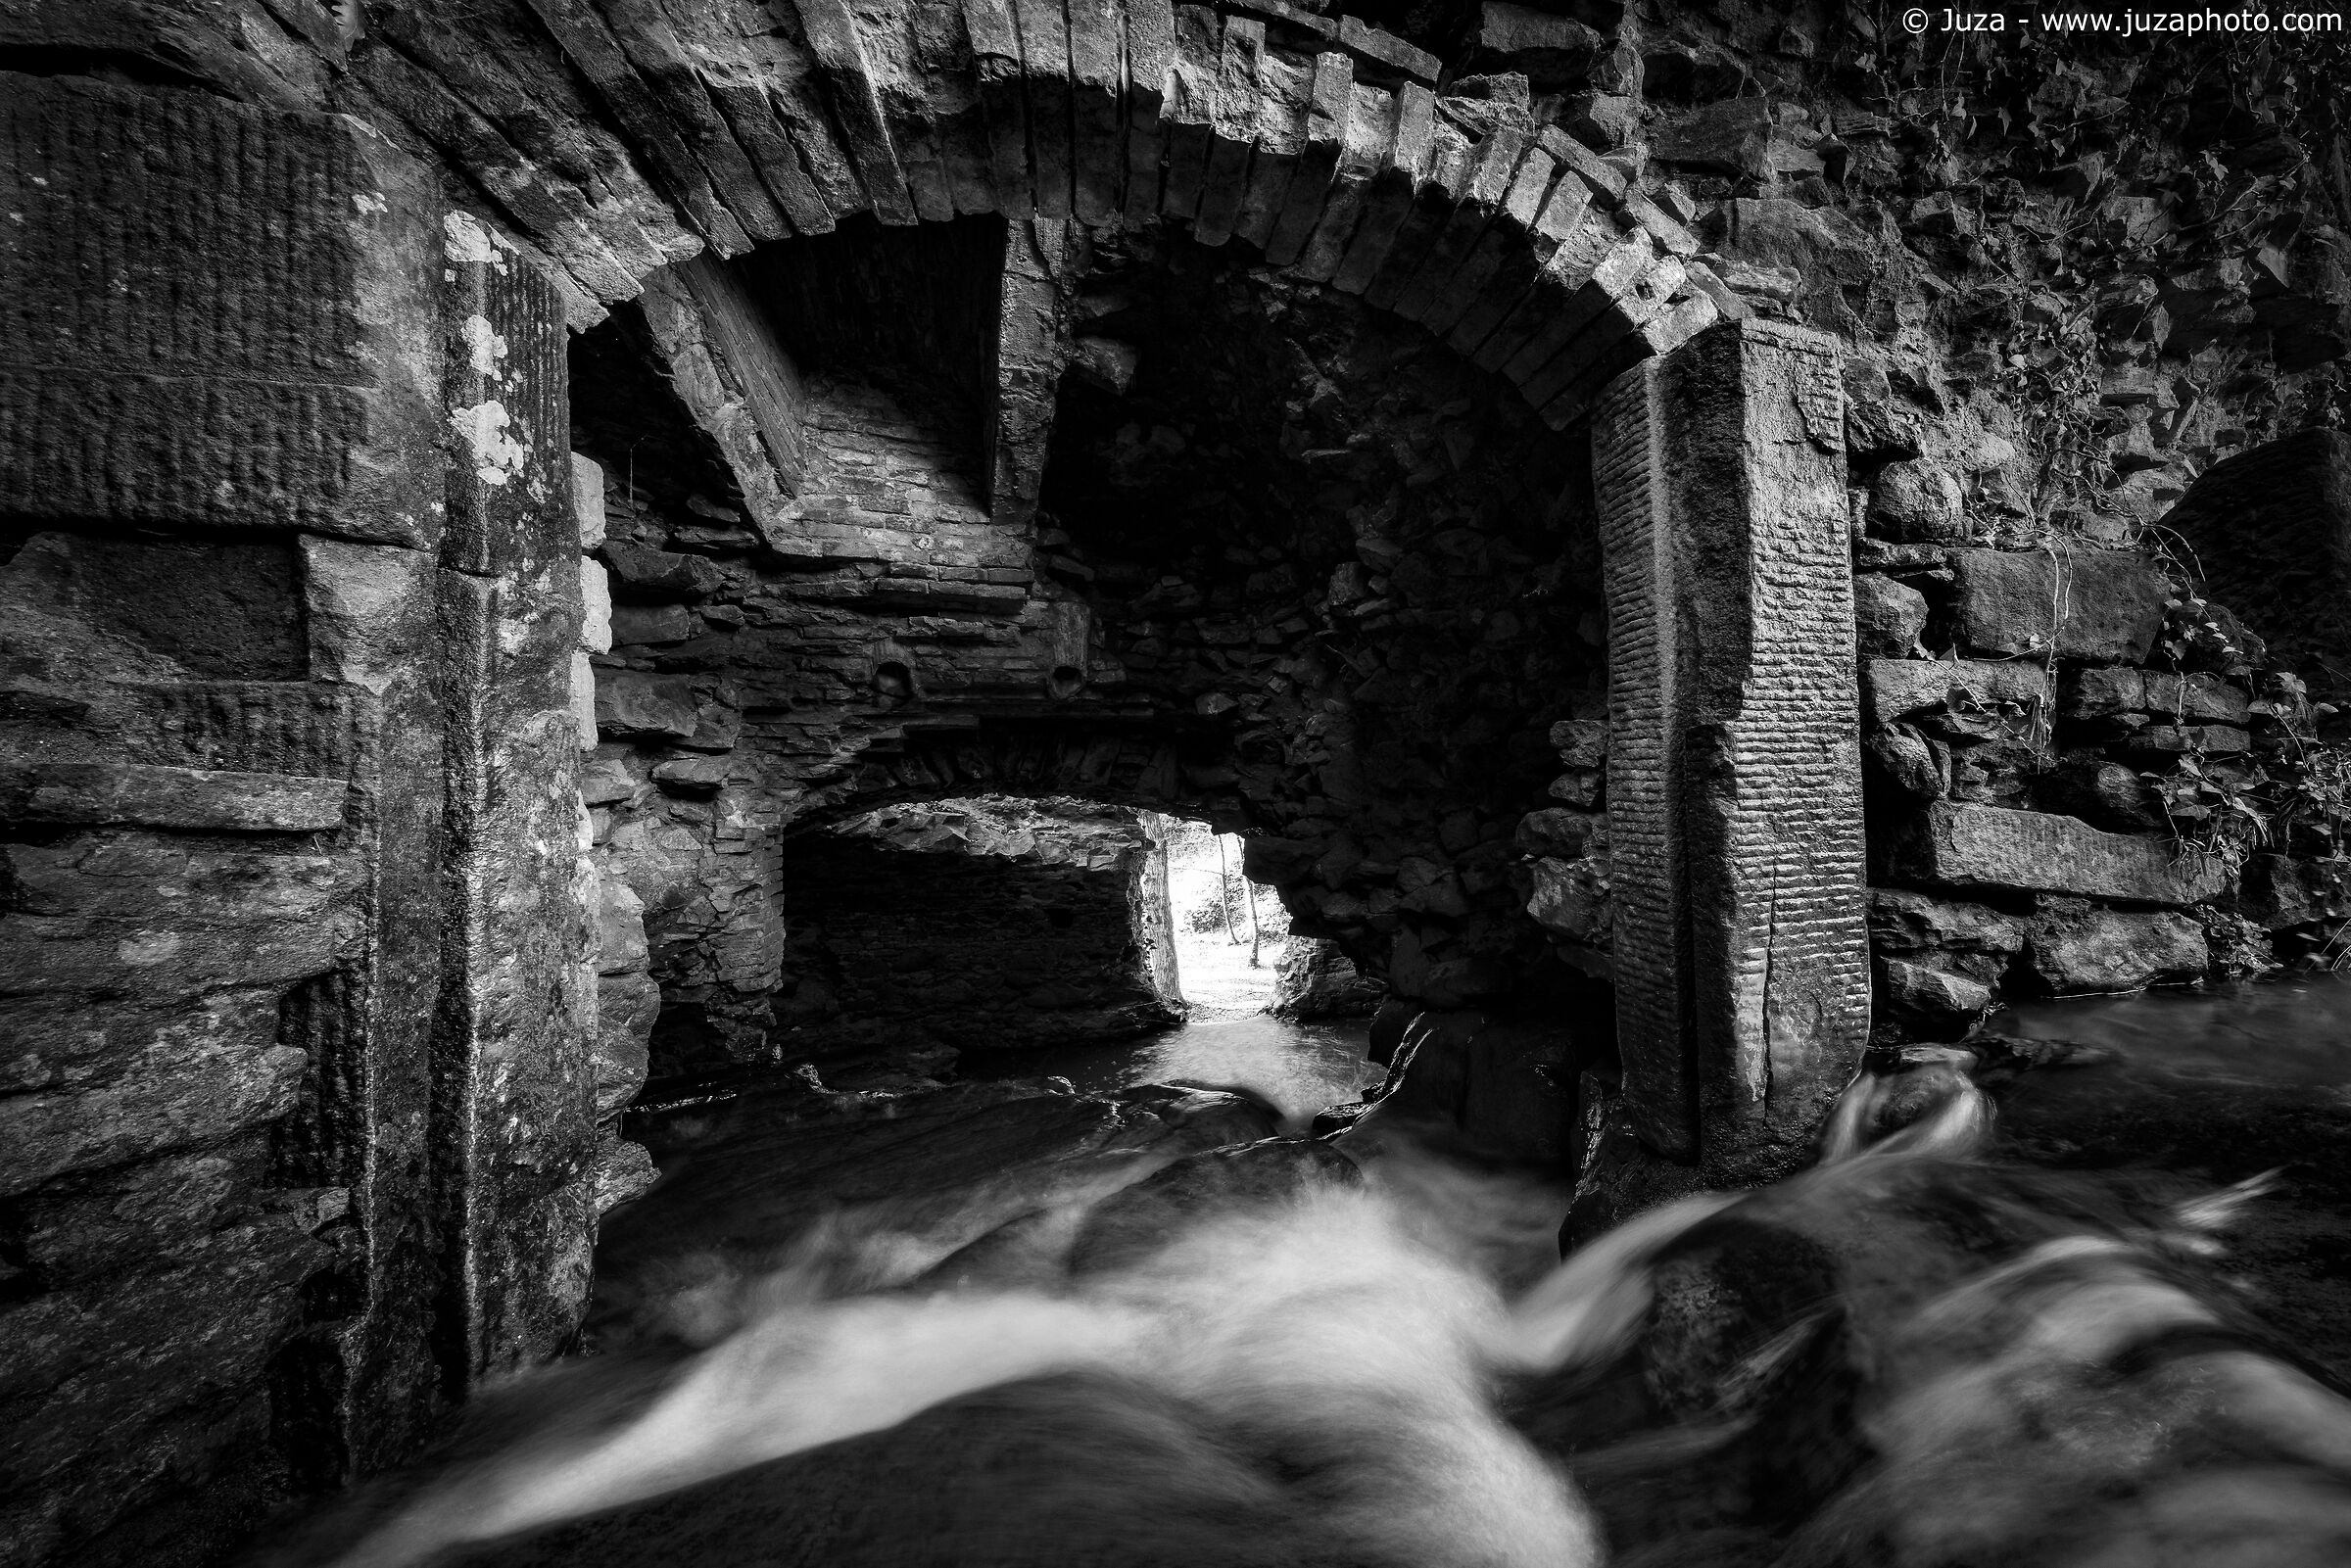 The flow of water through the ruins...